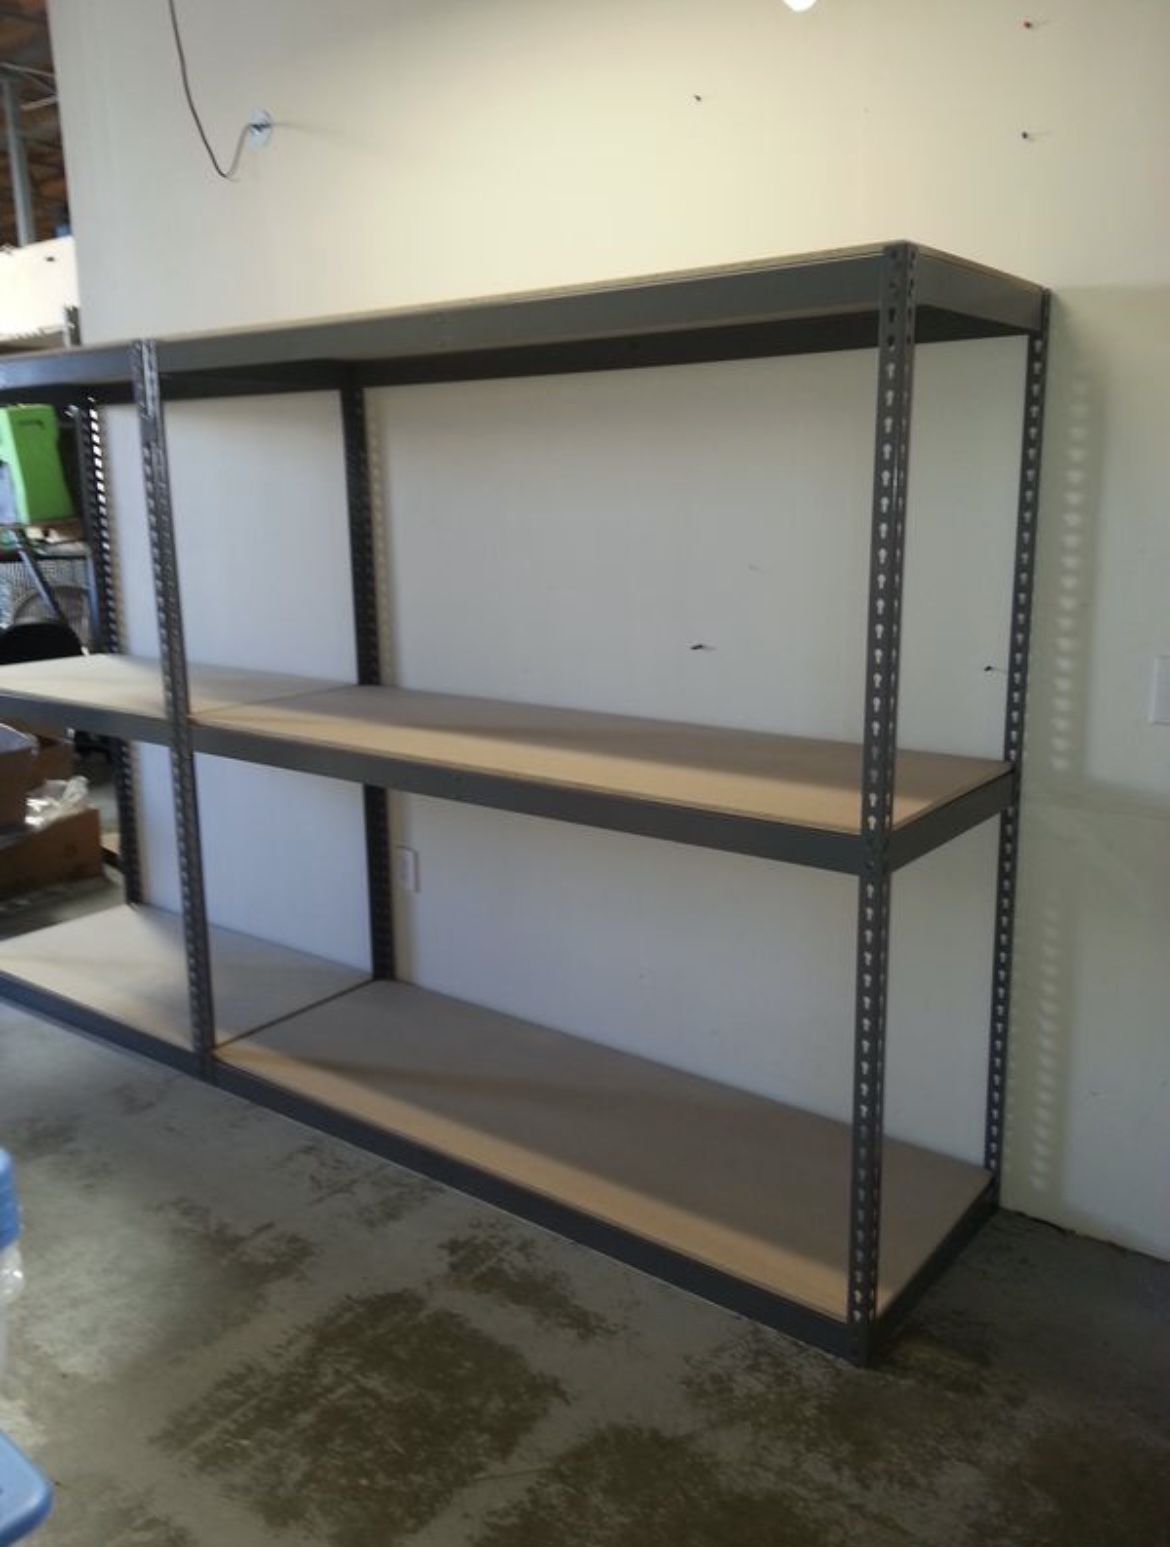 Garage Shelving 72 in W x 24 in D Boltless Shed Storage Shelves Heavy Duty Stronger than Home Depot & Lowes Racks Delivery Available